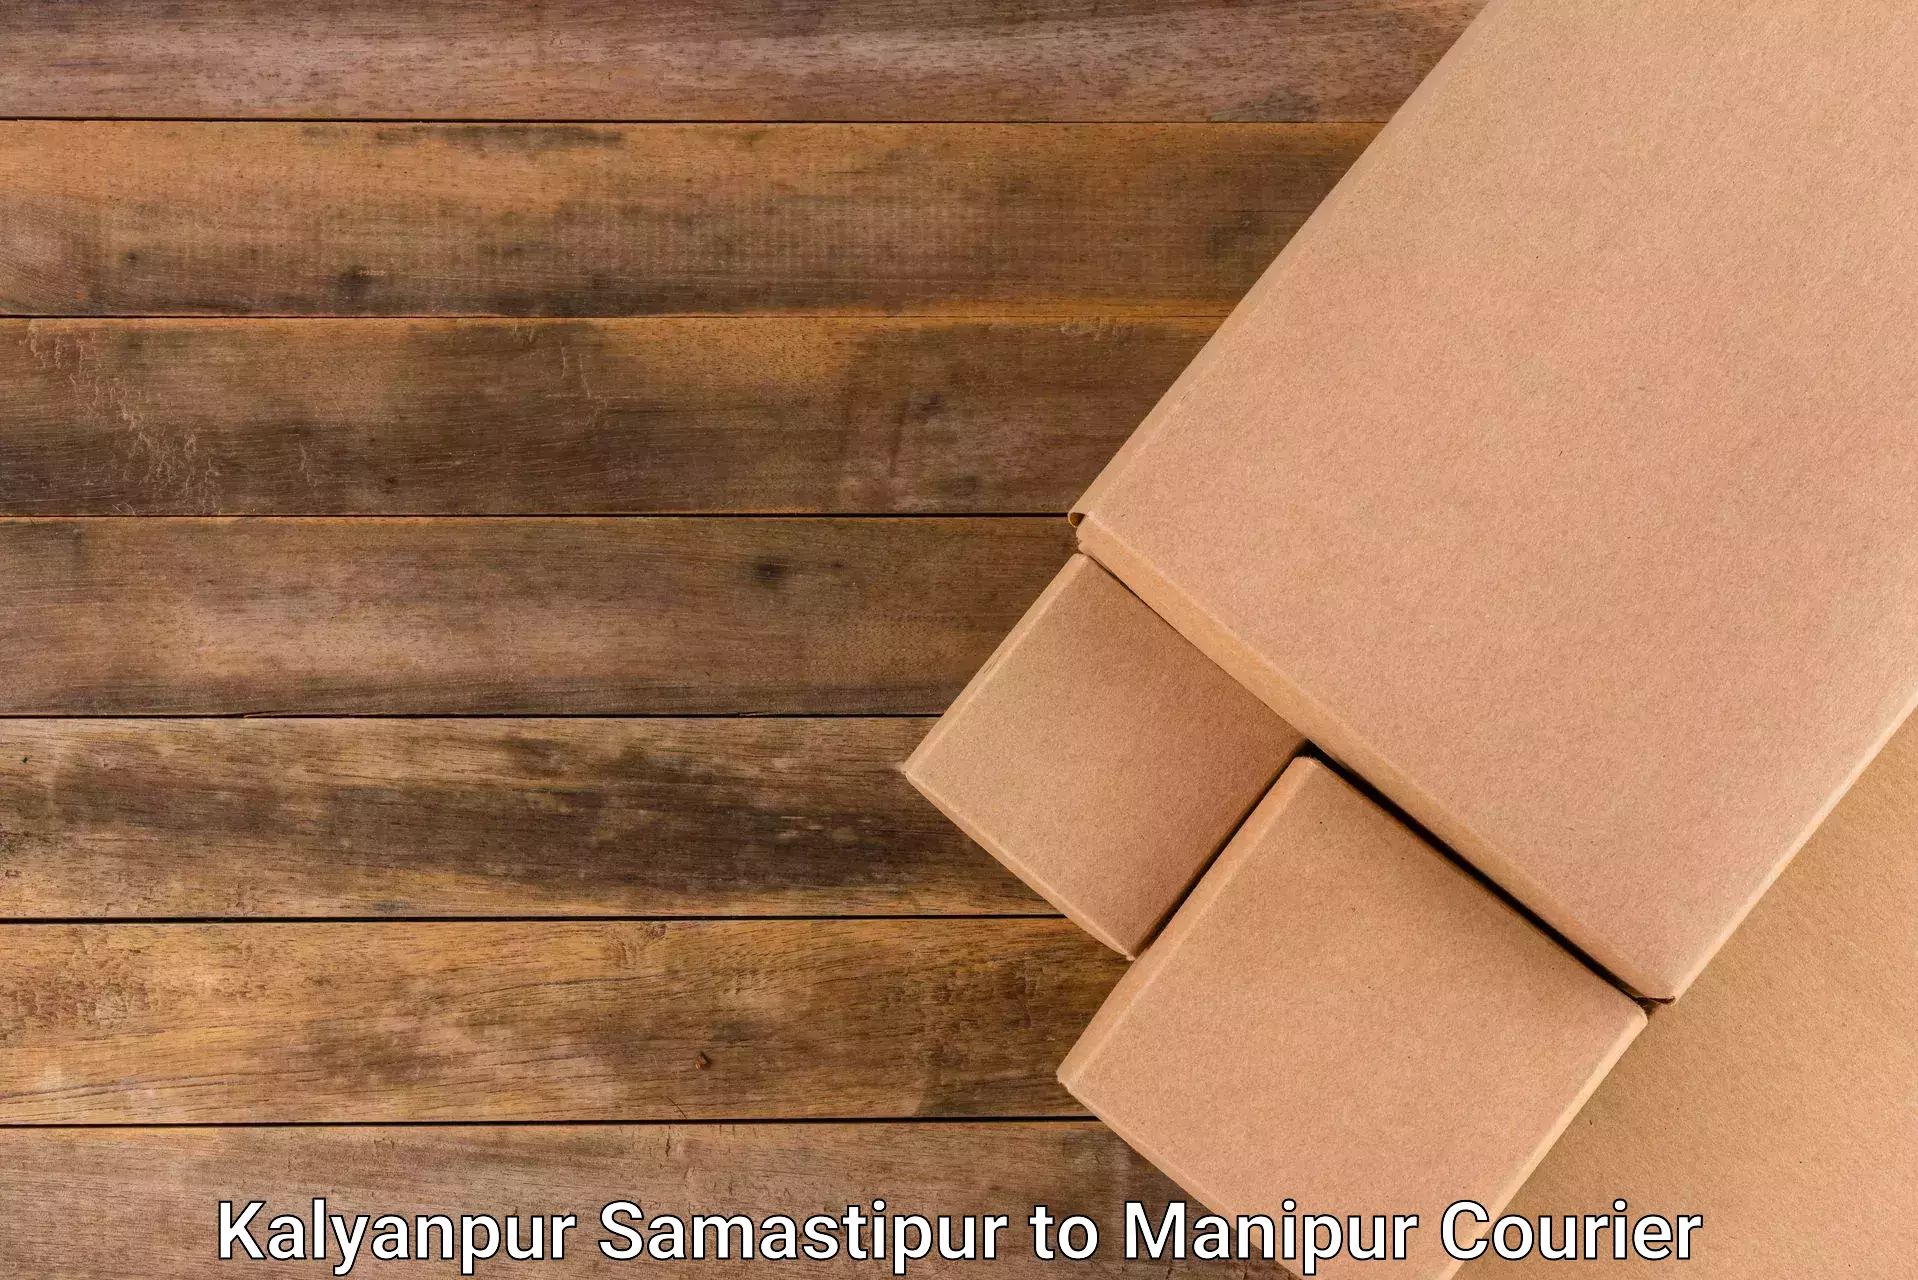 Same-day delivery solutions in Kalyanpur Samastipur to Thoubal